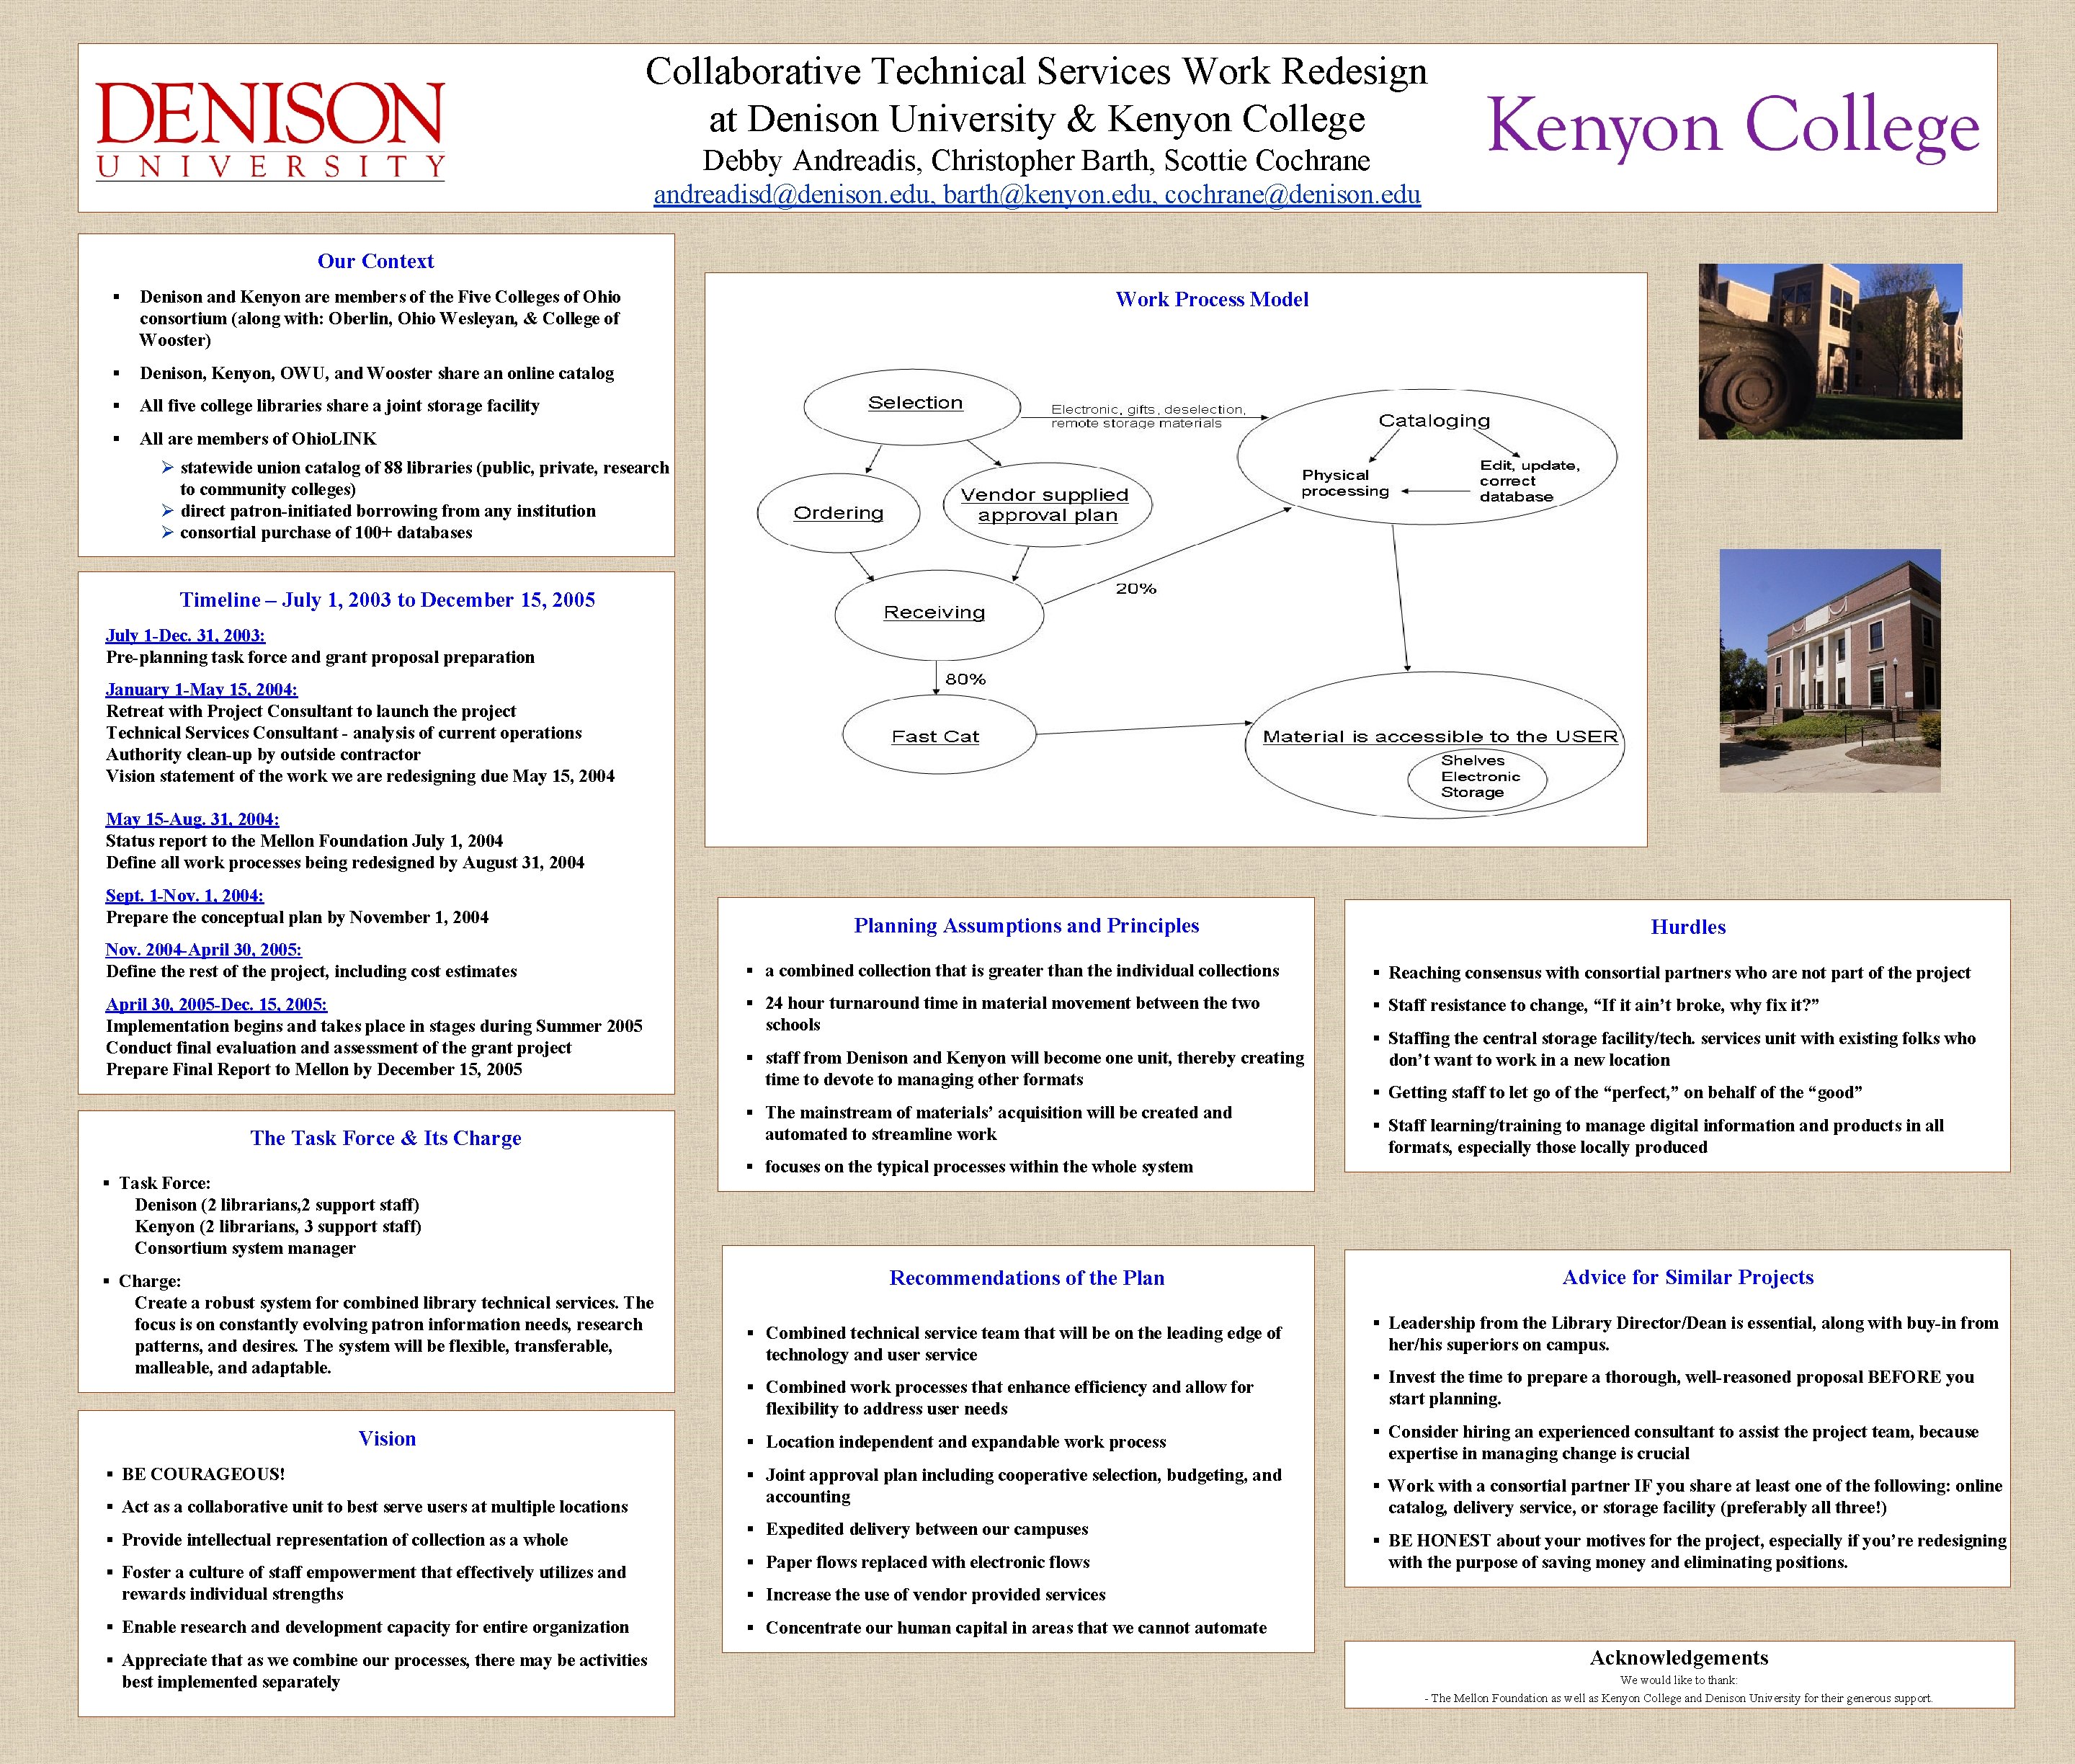 Collaborative Technical Services Work Redesign at Denison University & Kenyon College Debby Andreadis, Christopher